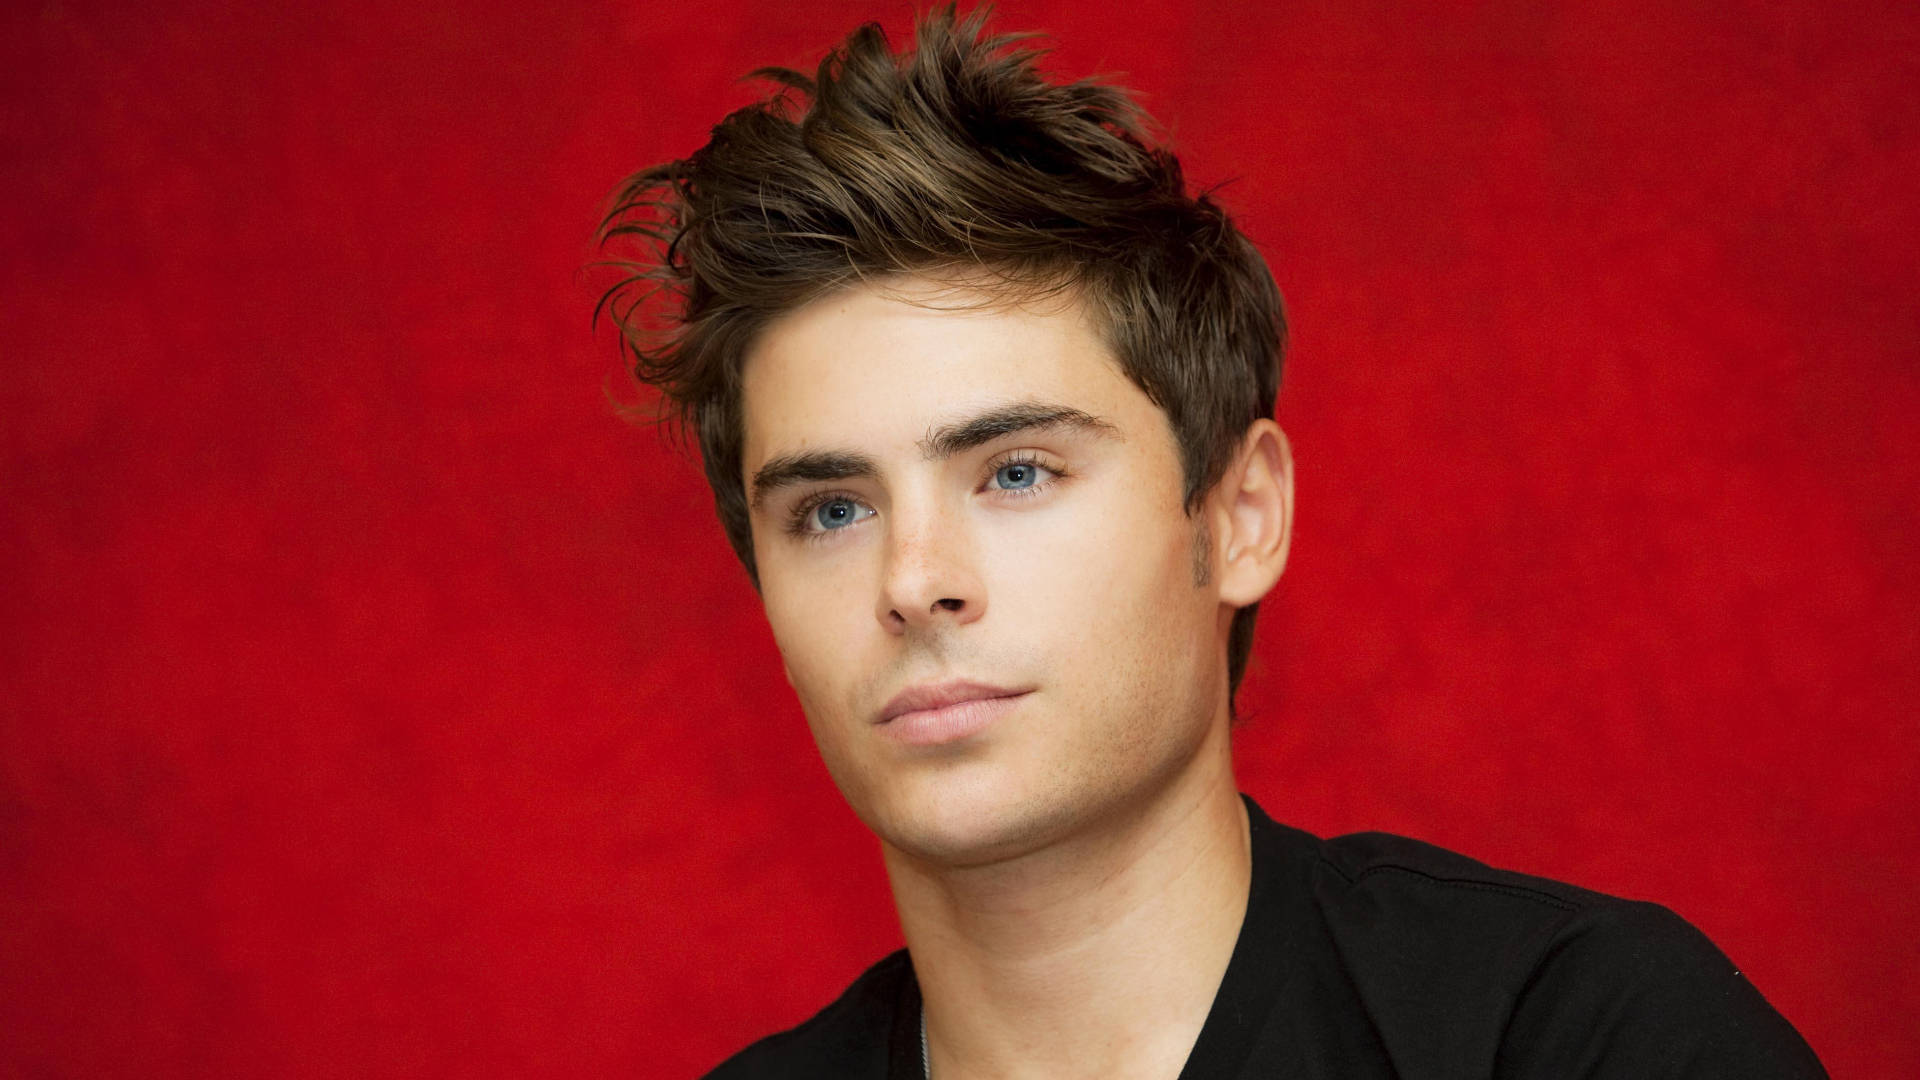 Zac Efron In Red Backdrop